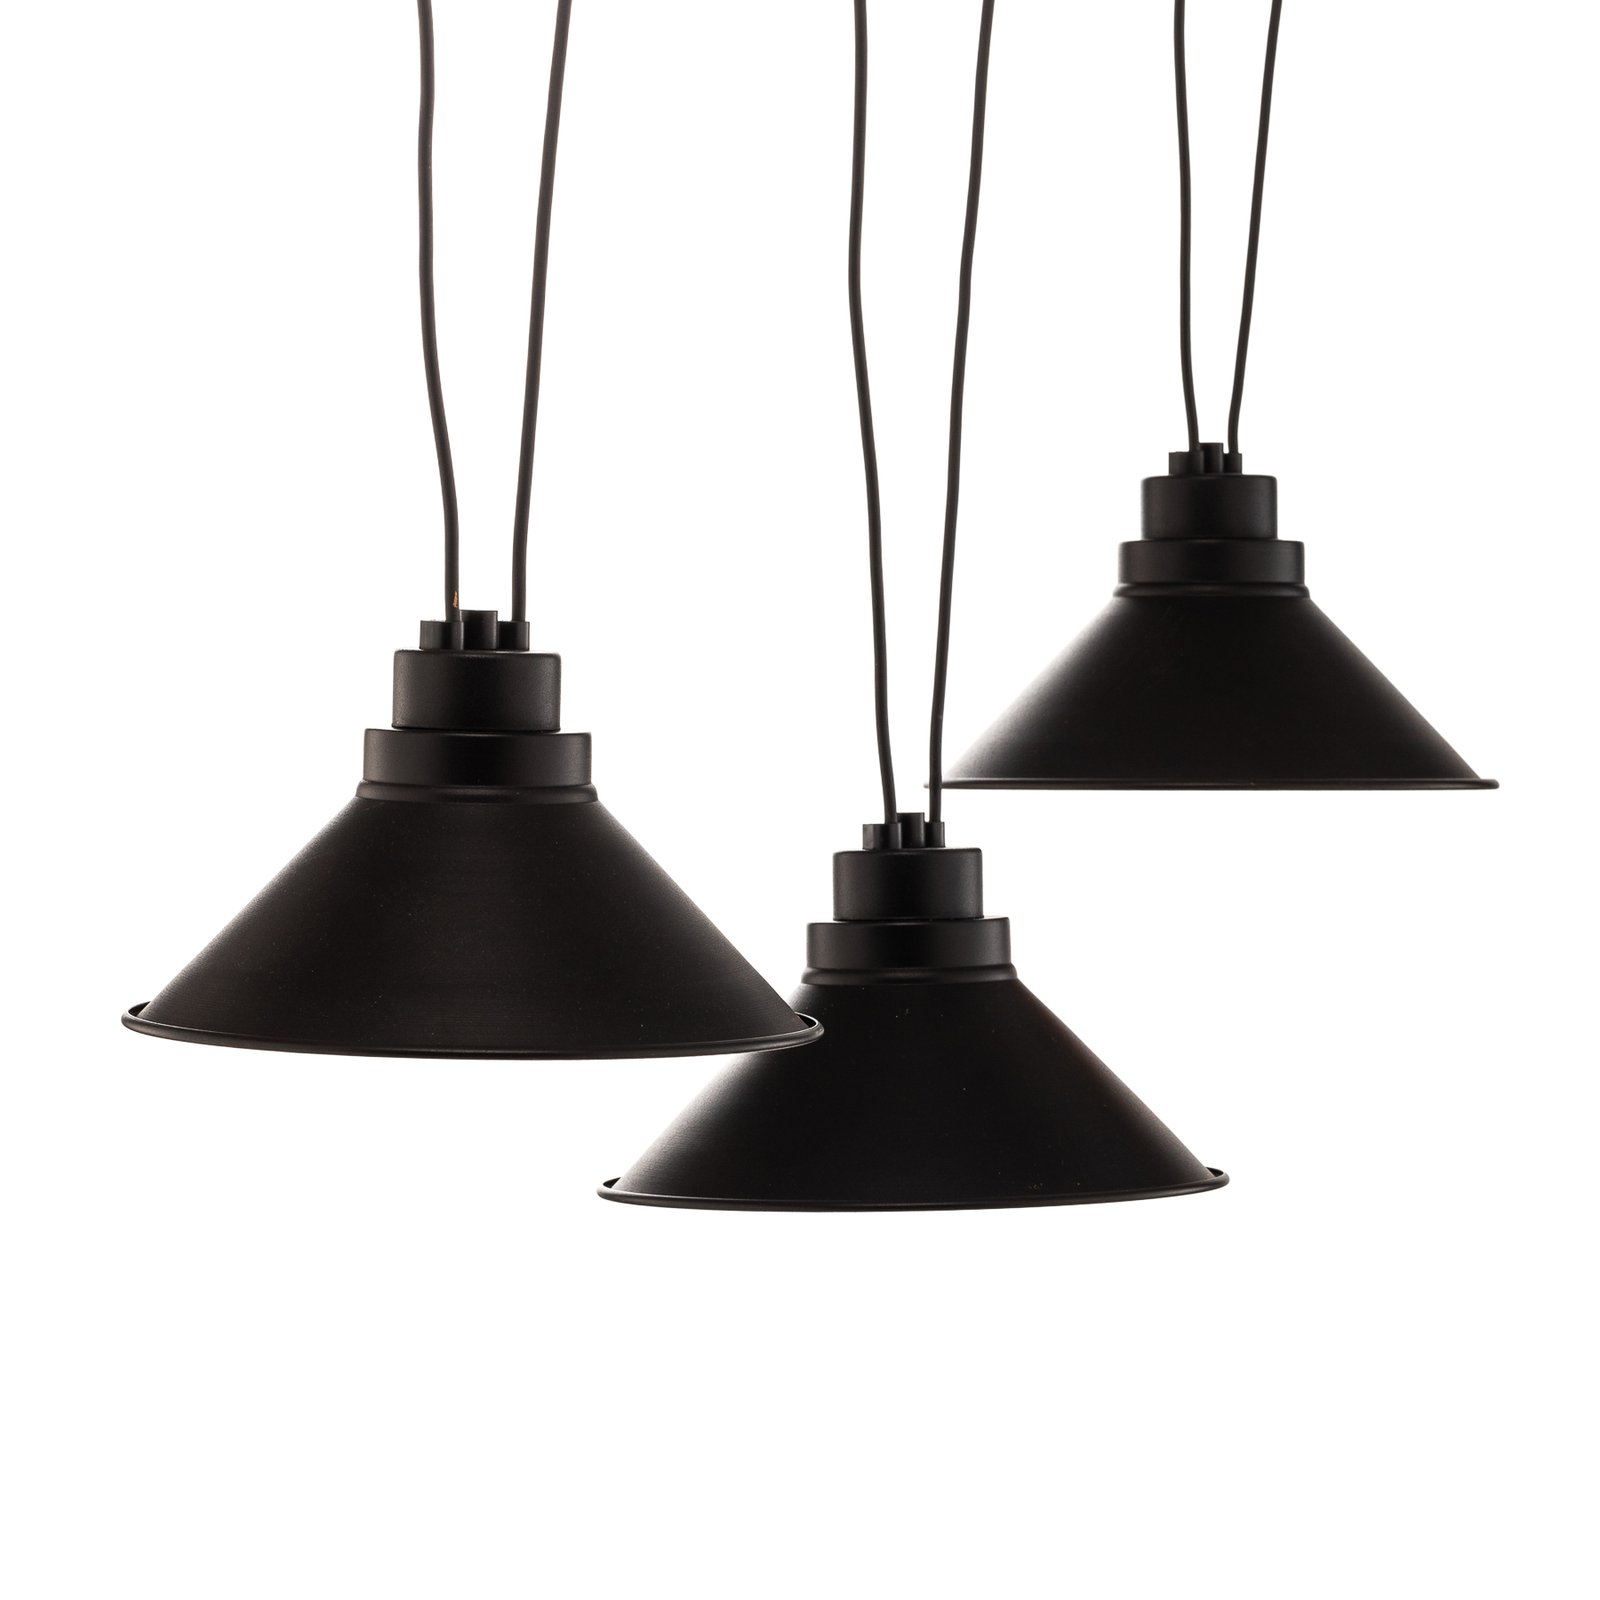 Perm III hanging light black, can be mounted variably